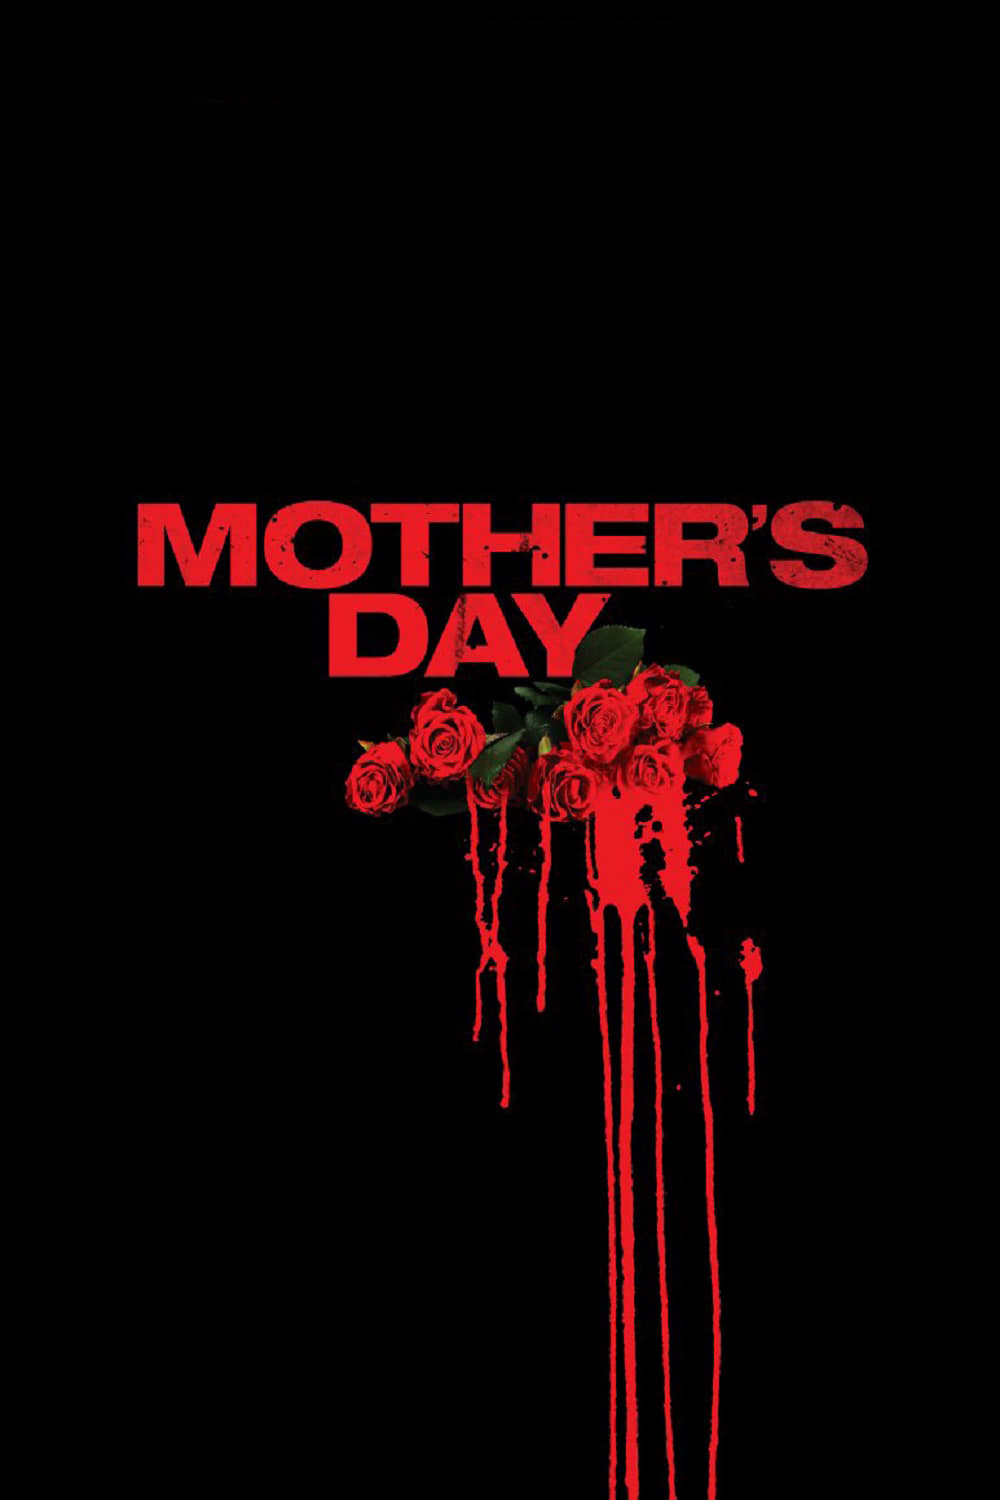 Poster Phim Ngày Của Mẹ  (Mother's Day)